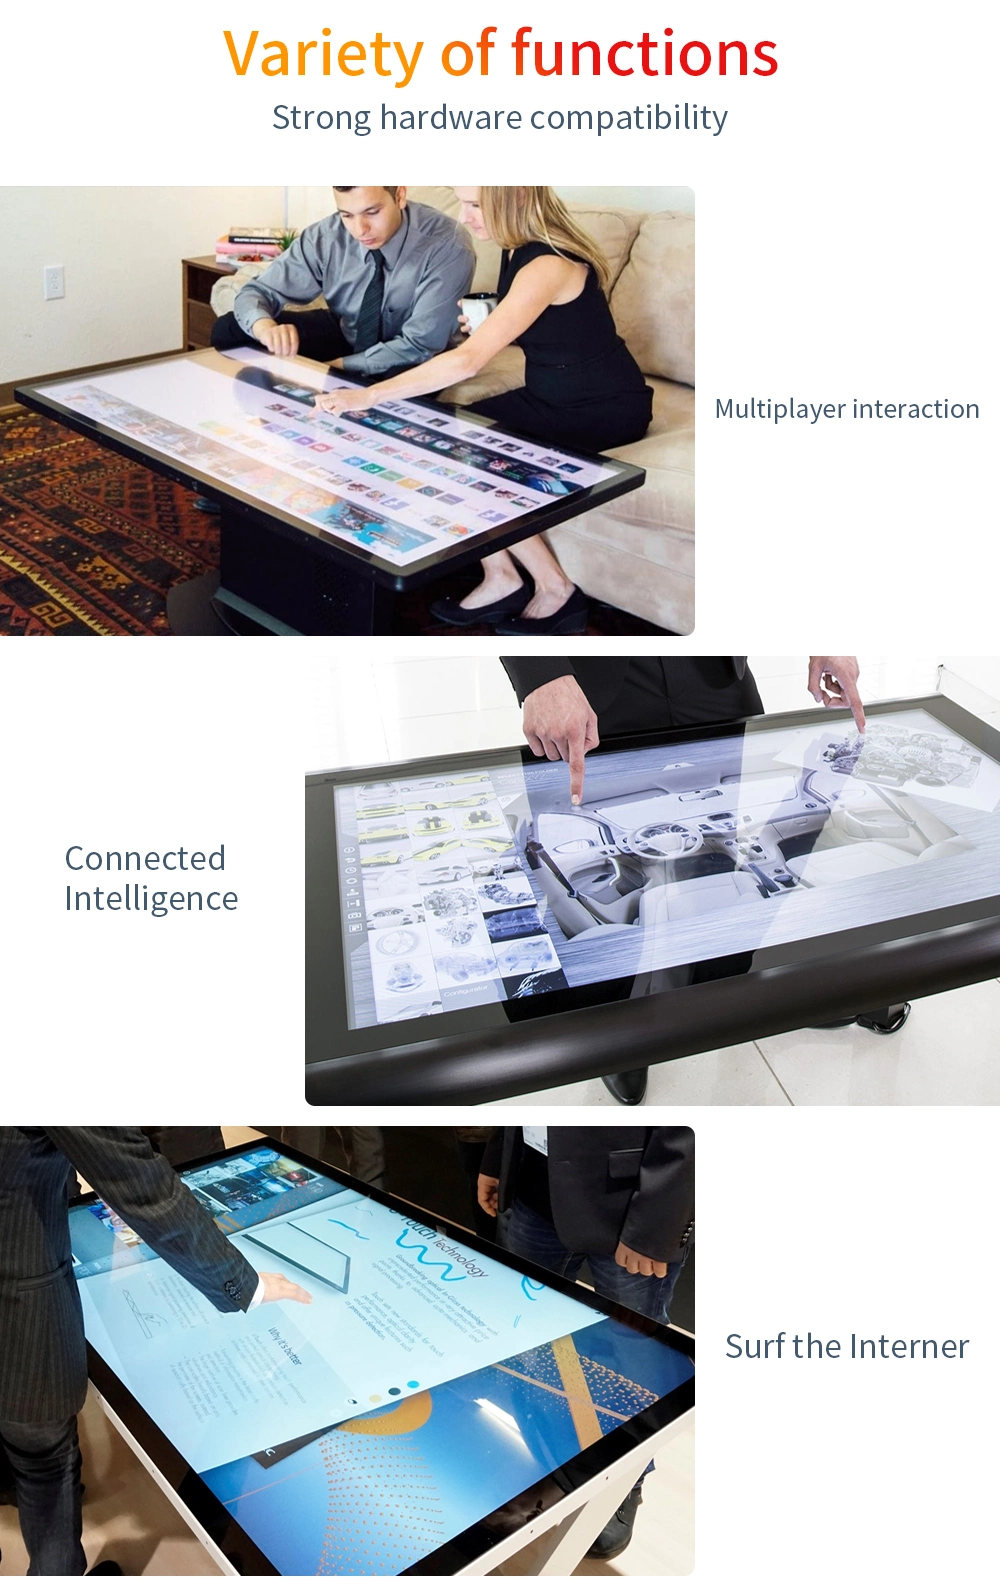 45 Inch WiFi Smart Android Touch Table Multi Touch Table Touch Screen Coffee Table